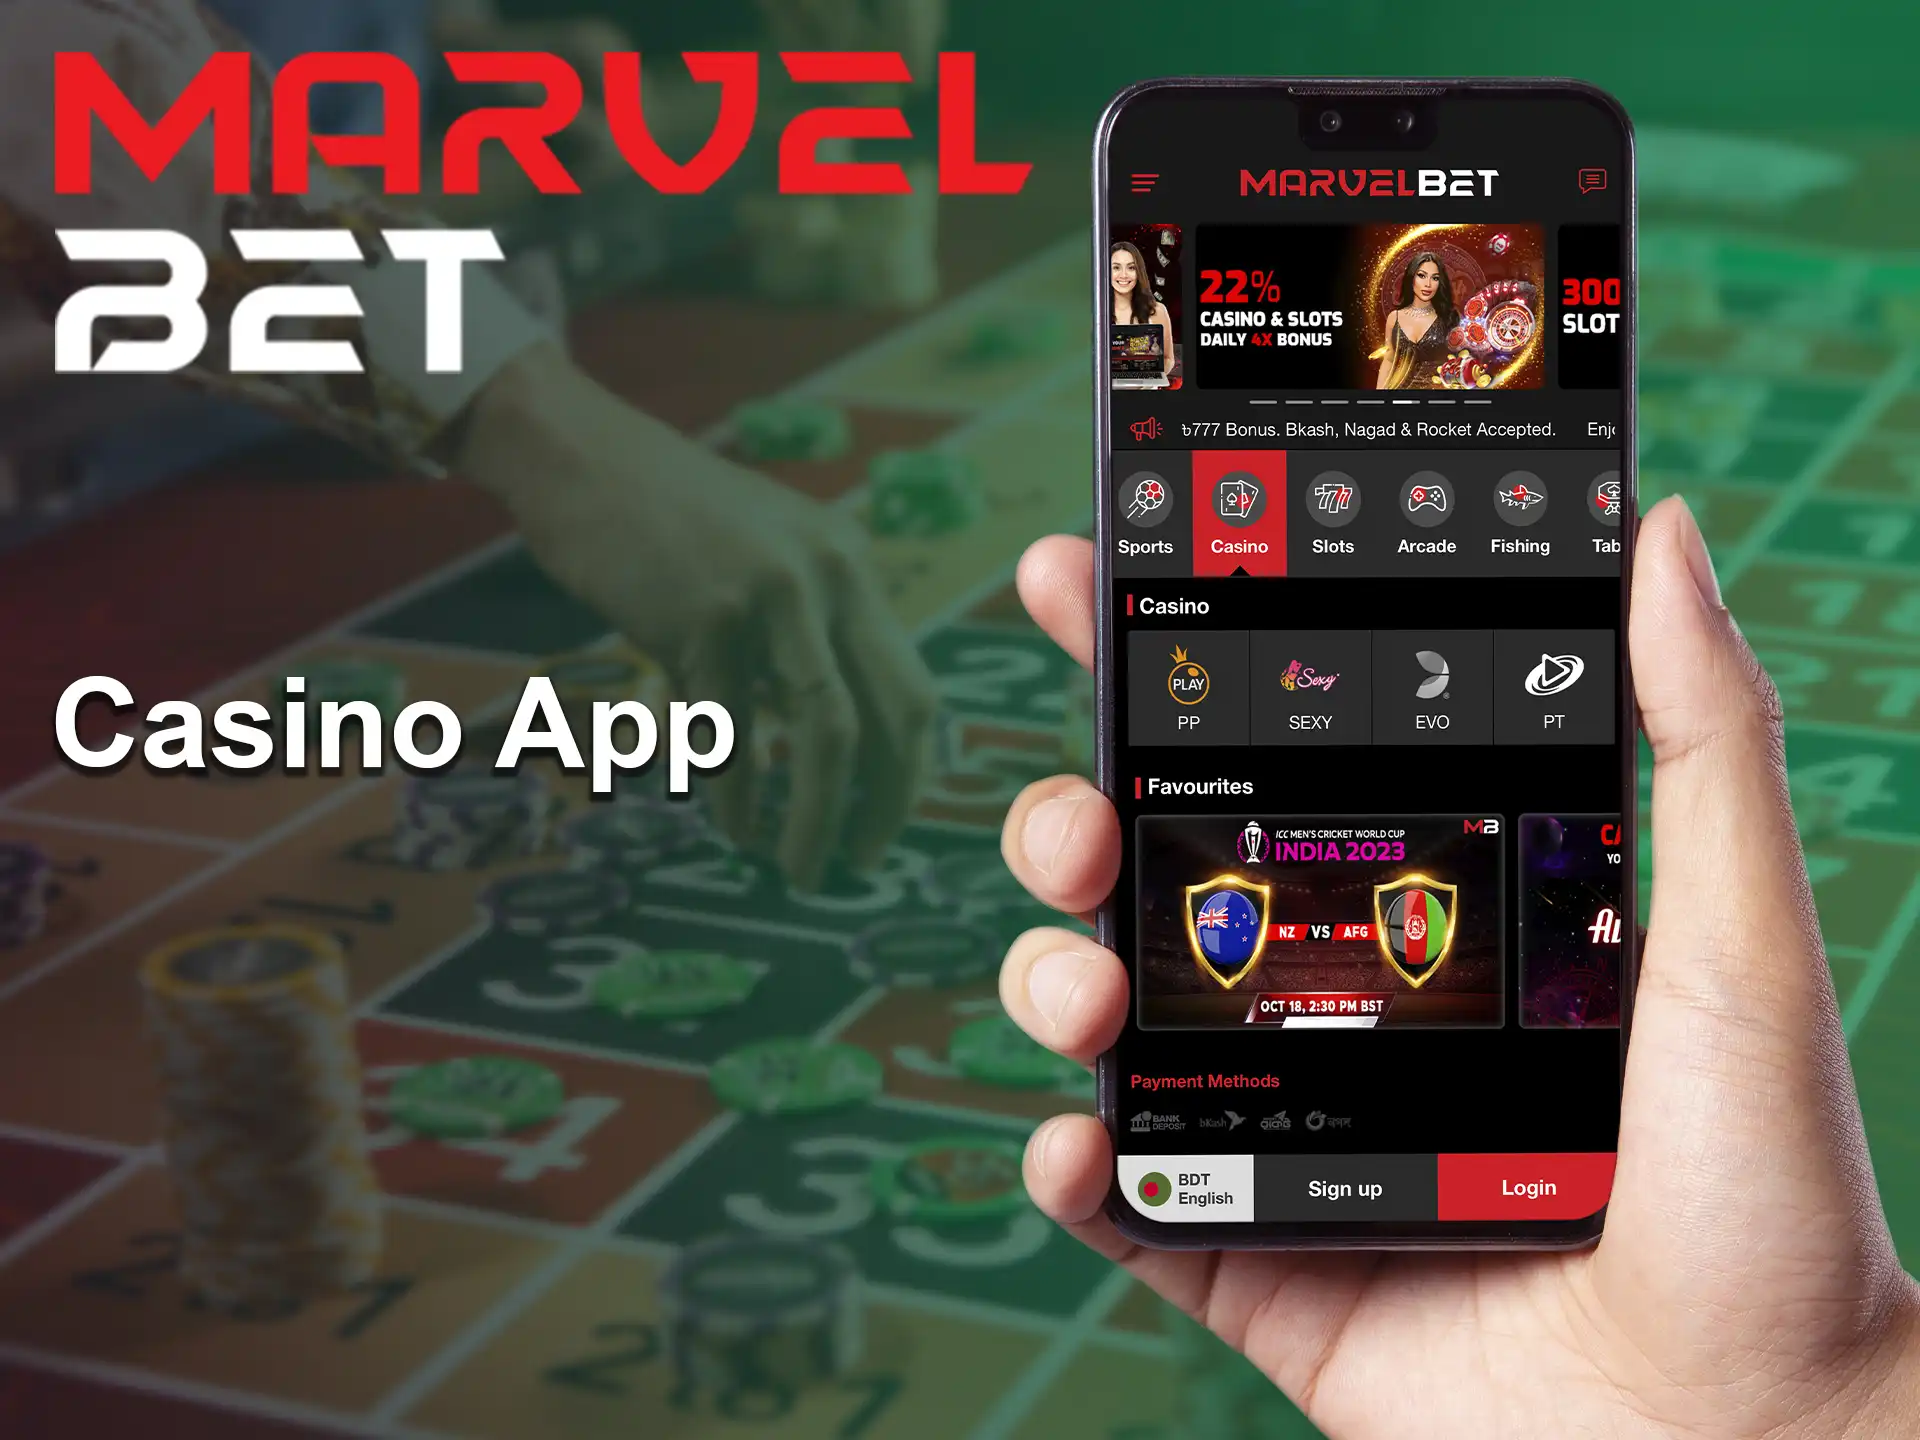 The app can be downloaded from the official Marvelbet website to your smartphone.